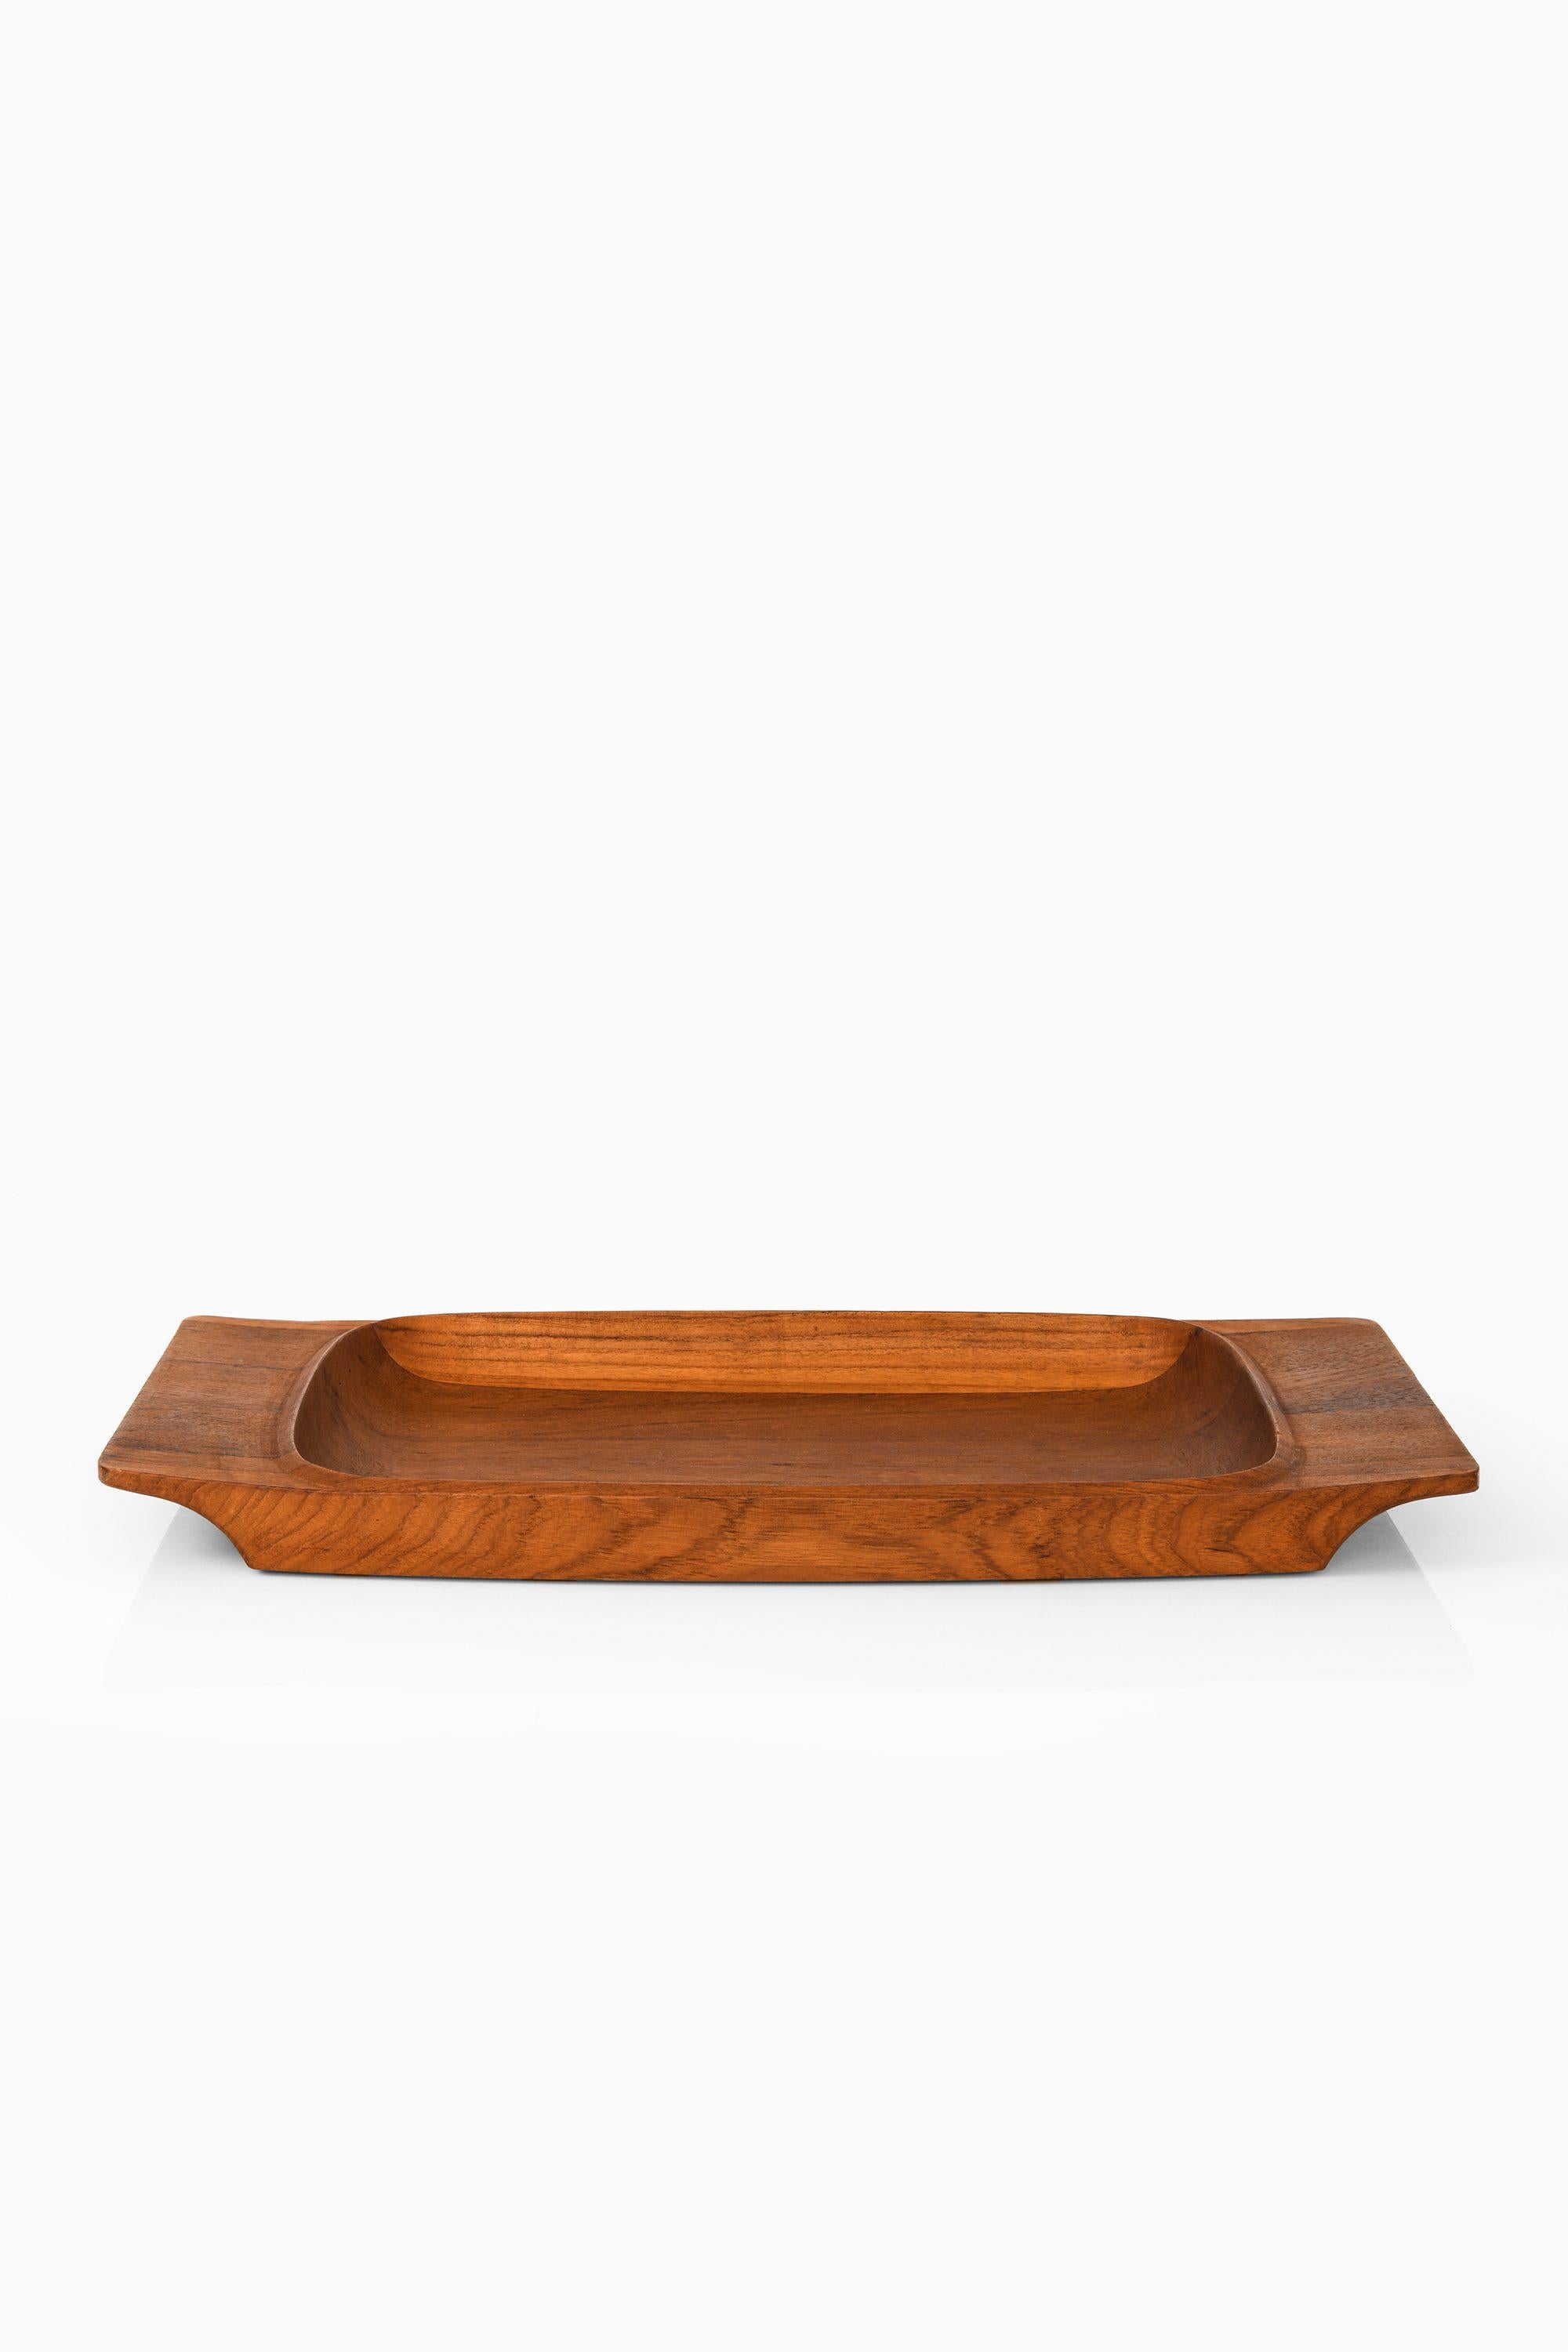 Serving Tray in Teak by Jens Quistgaard, 1950's

Additional Information:
Material: Teak
Style: Mid century, Scandinavian
Produced by Dansk in Denmark
Dimensions (W x D x H): 57 x 32 x 4.5 cm
Condition: Good vintage condition, with small signs of